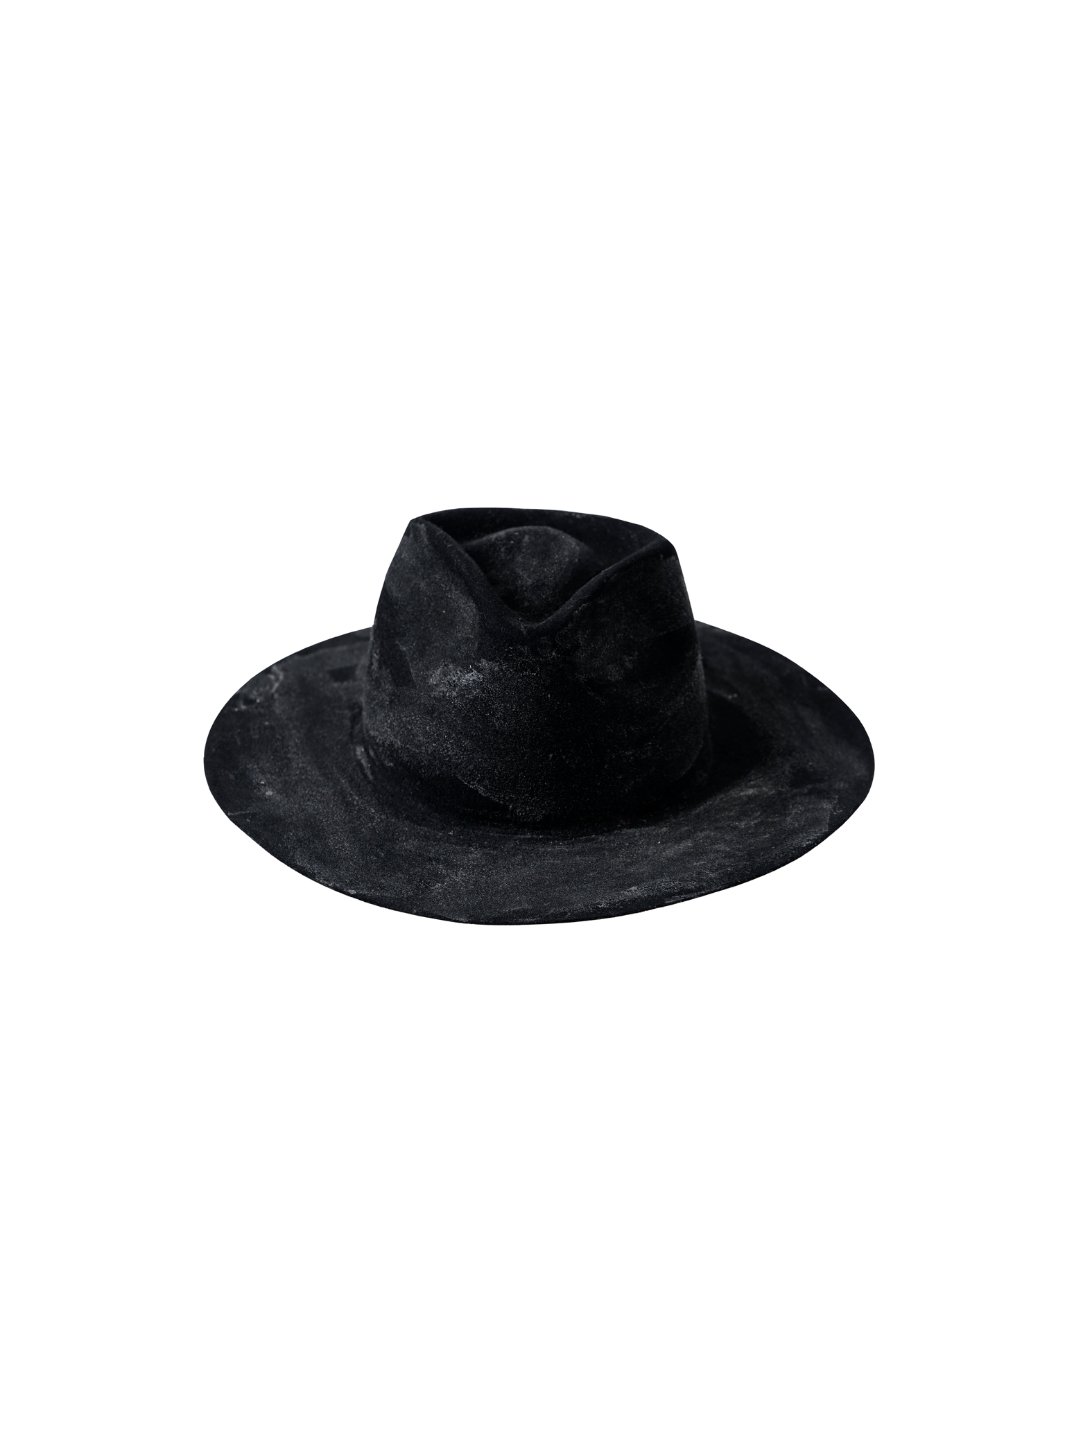 black rustic felt hat handcrafted by artisans in Colombia sustainable fashion cowboy hat